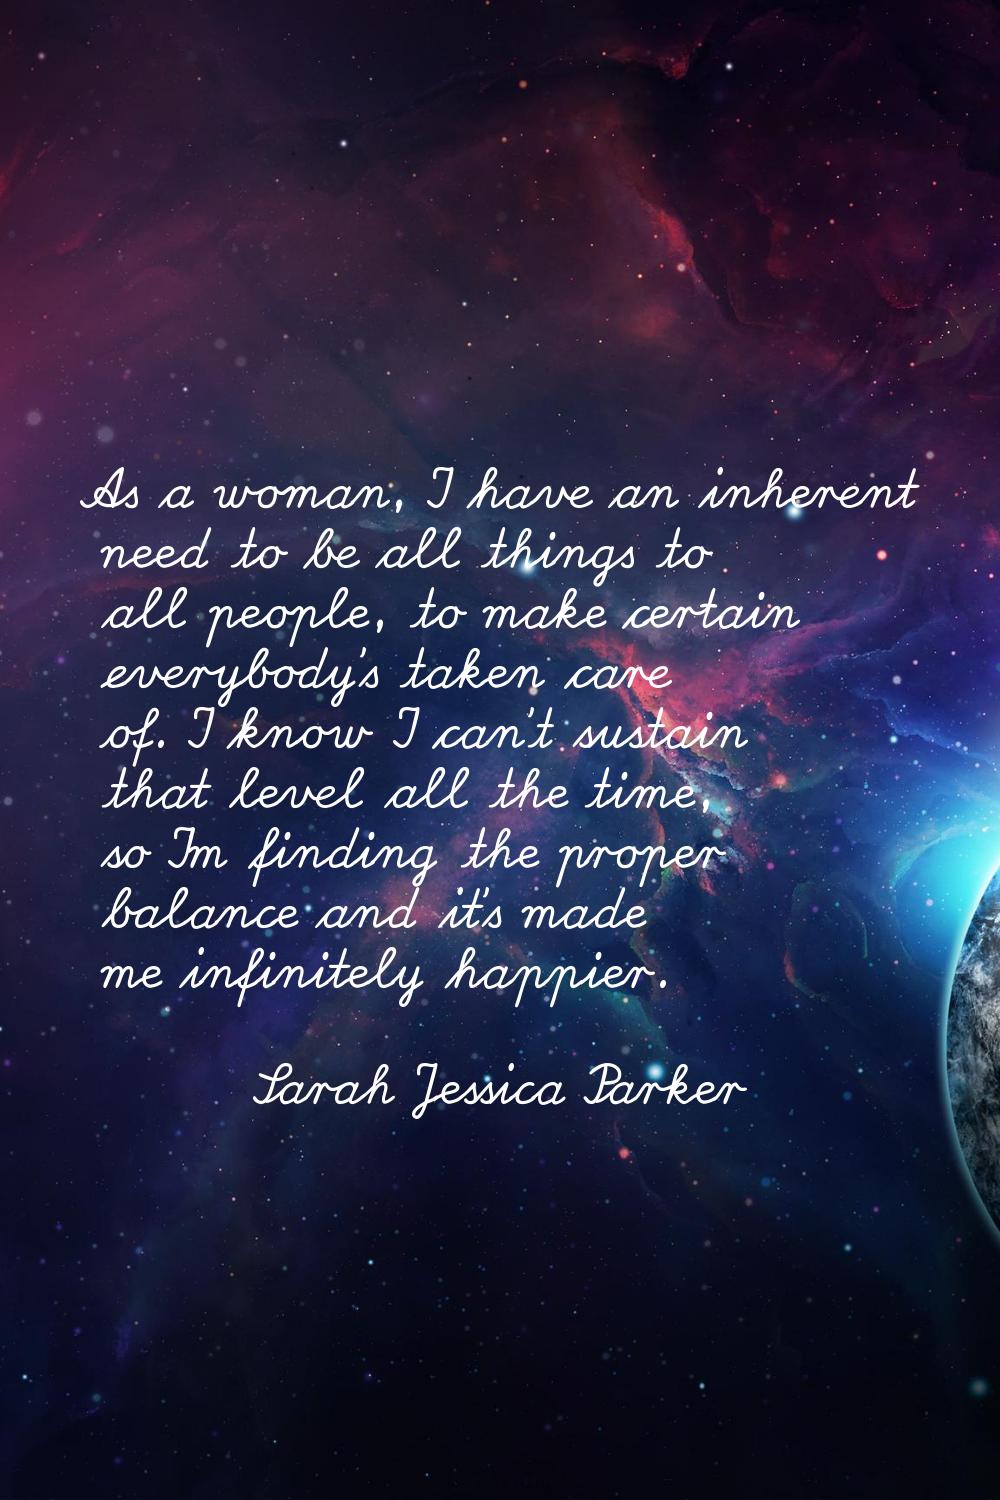 As a woman, I have an inherent need to be all things to all people, to make certain everybody's tak